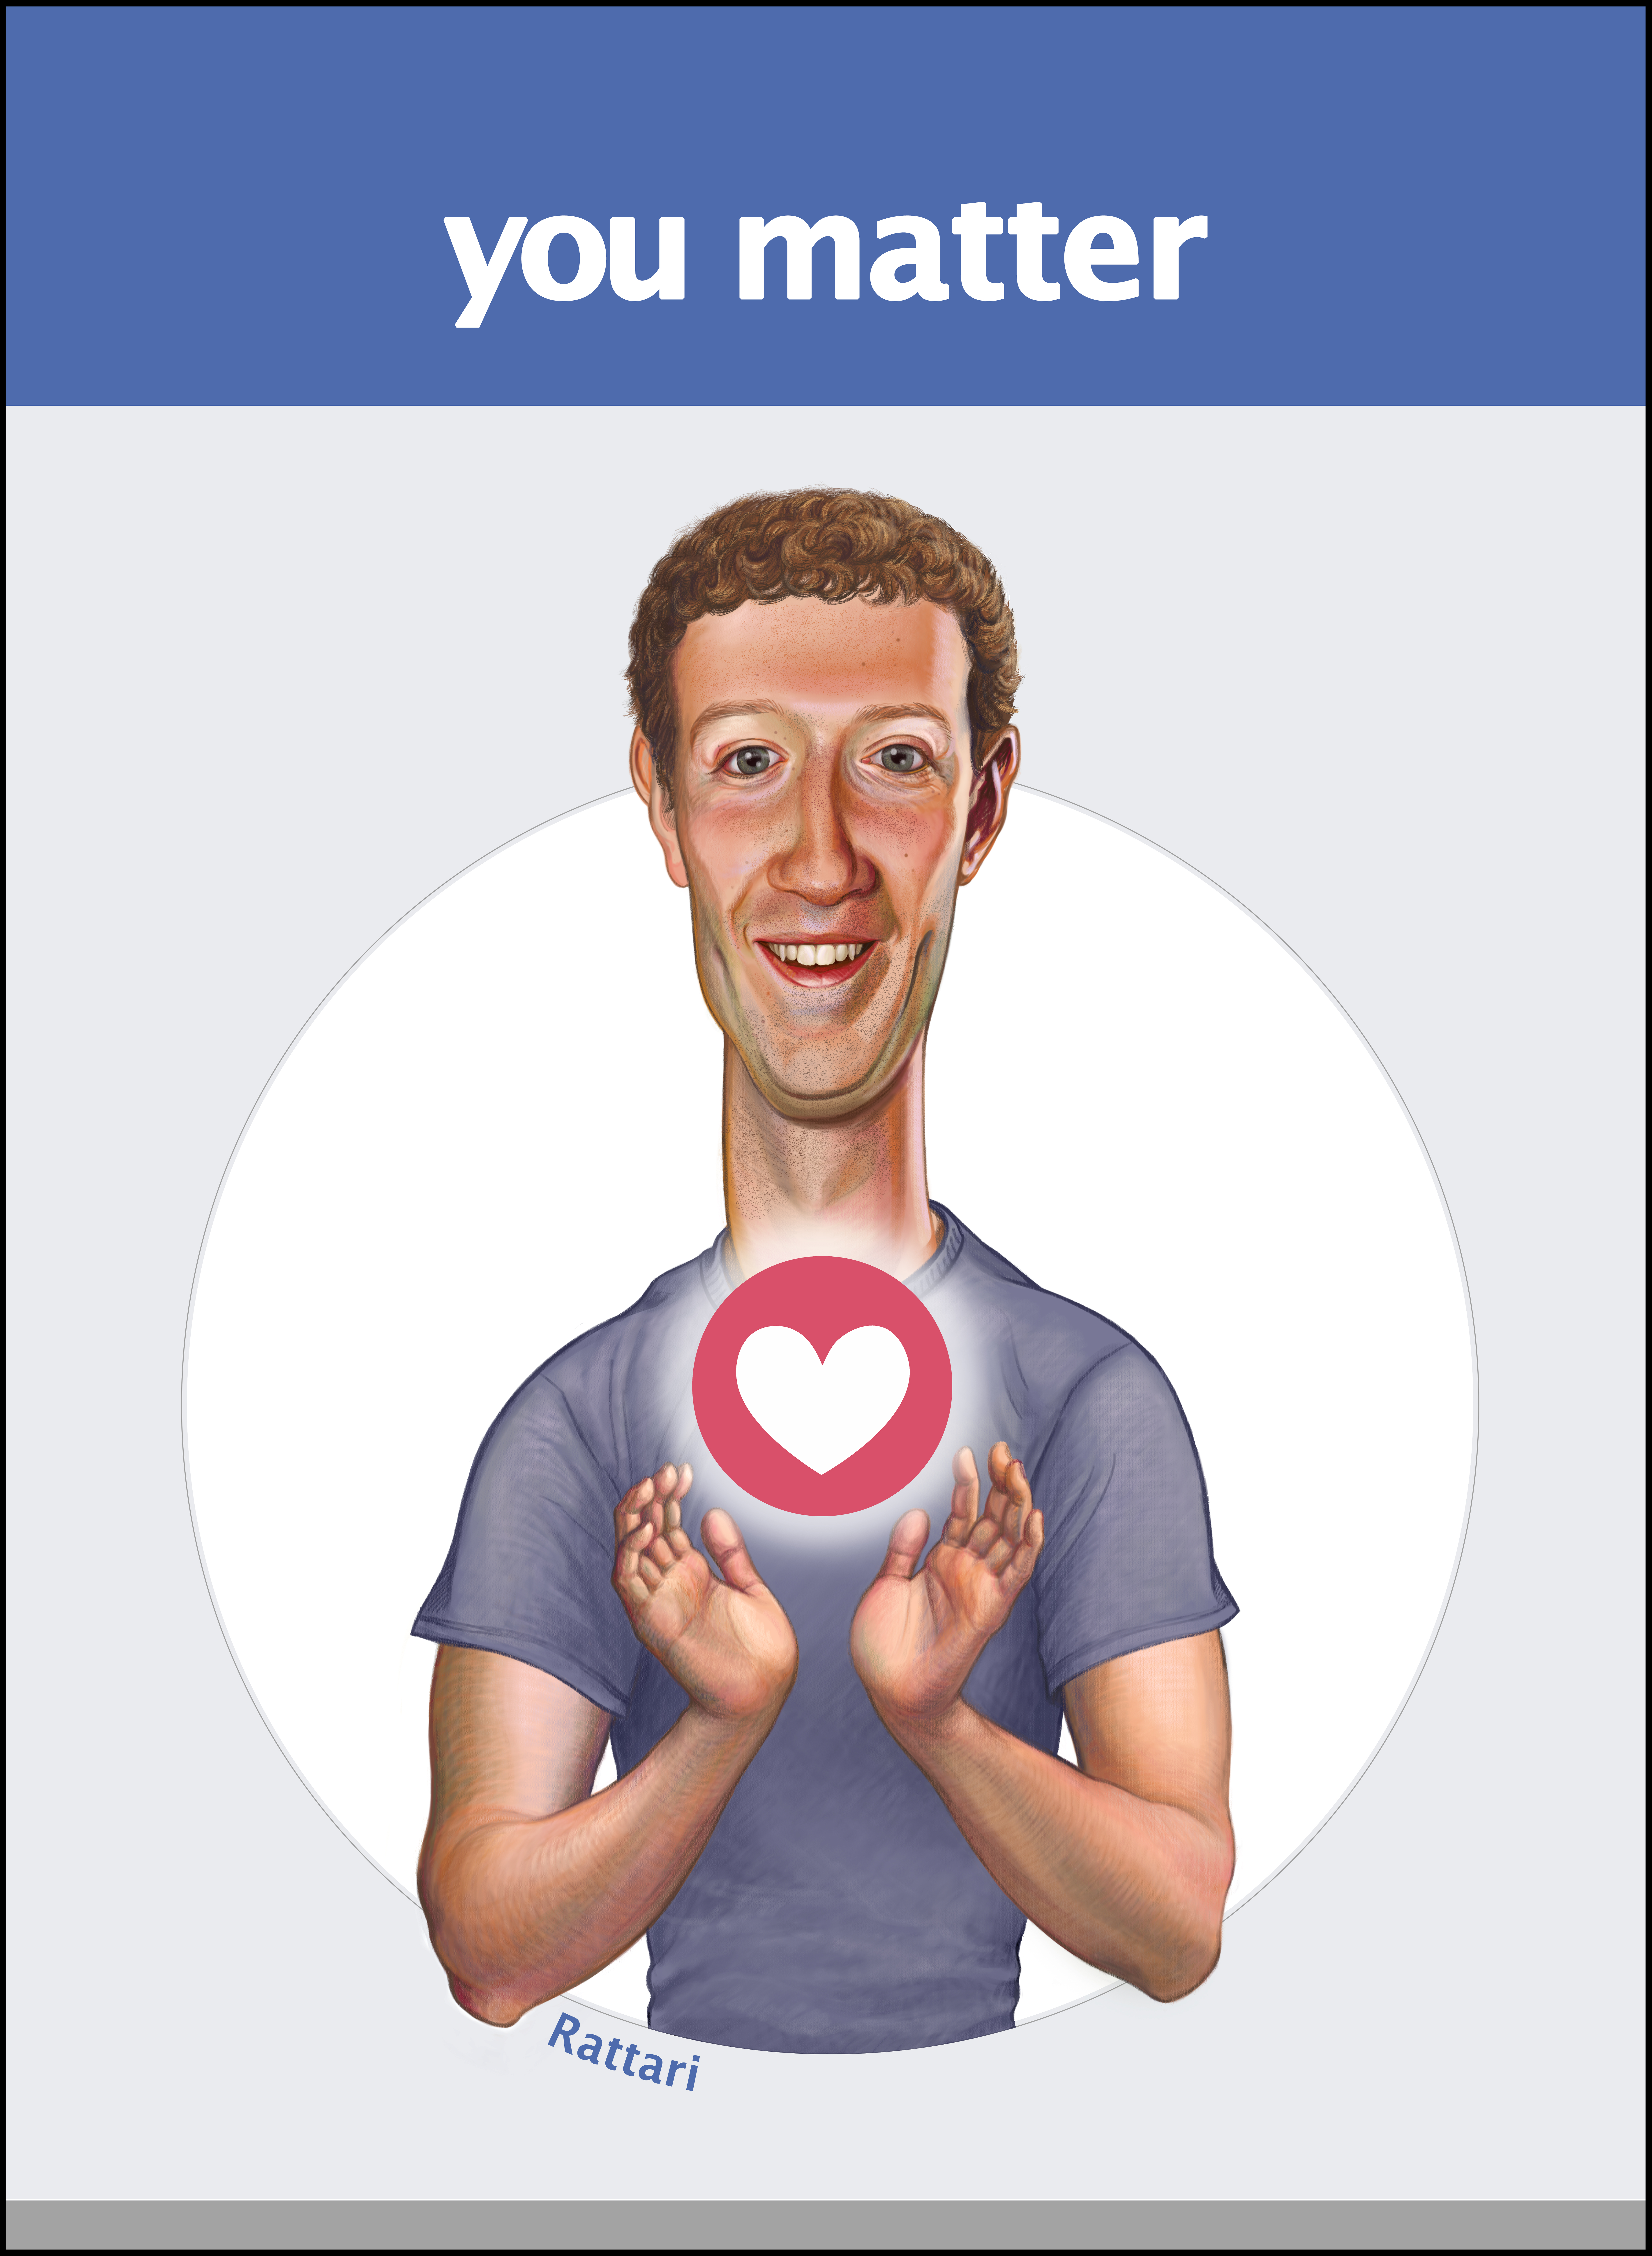 Have a Like A zuckerberg caricature